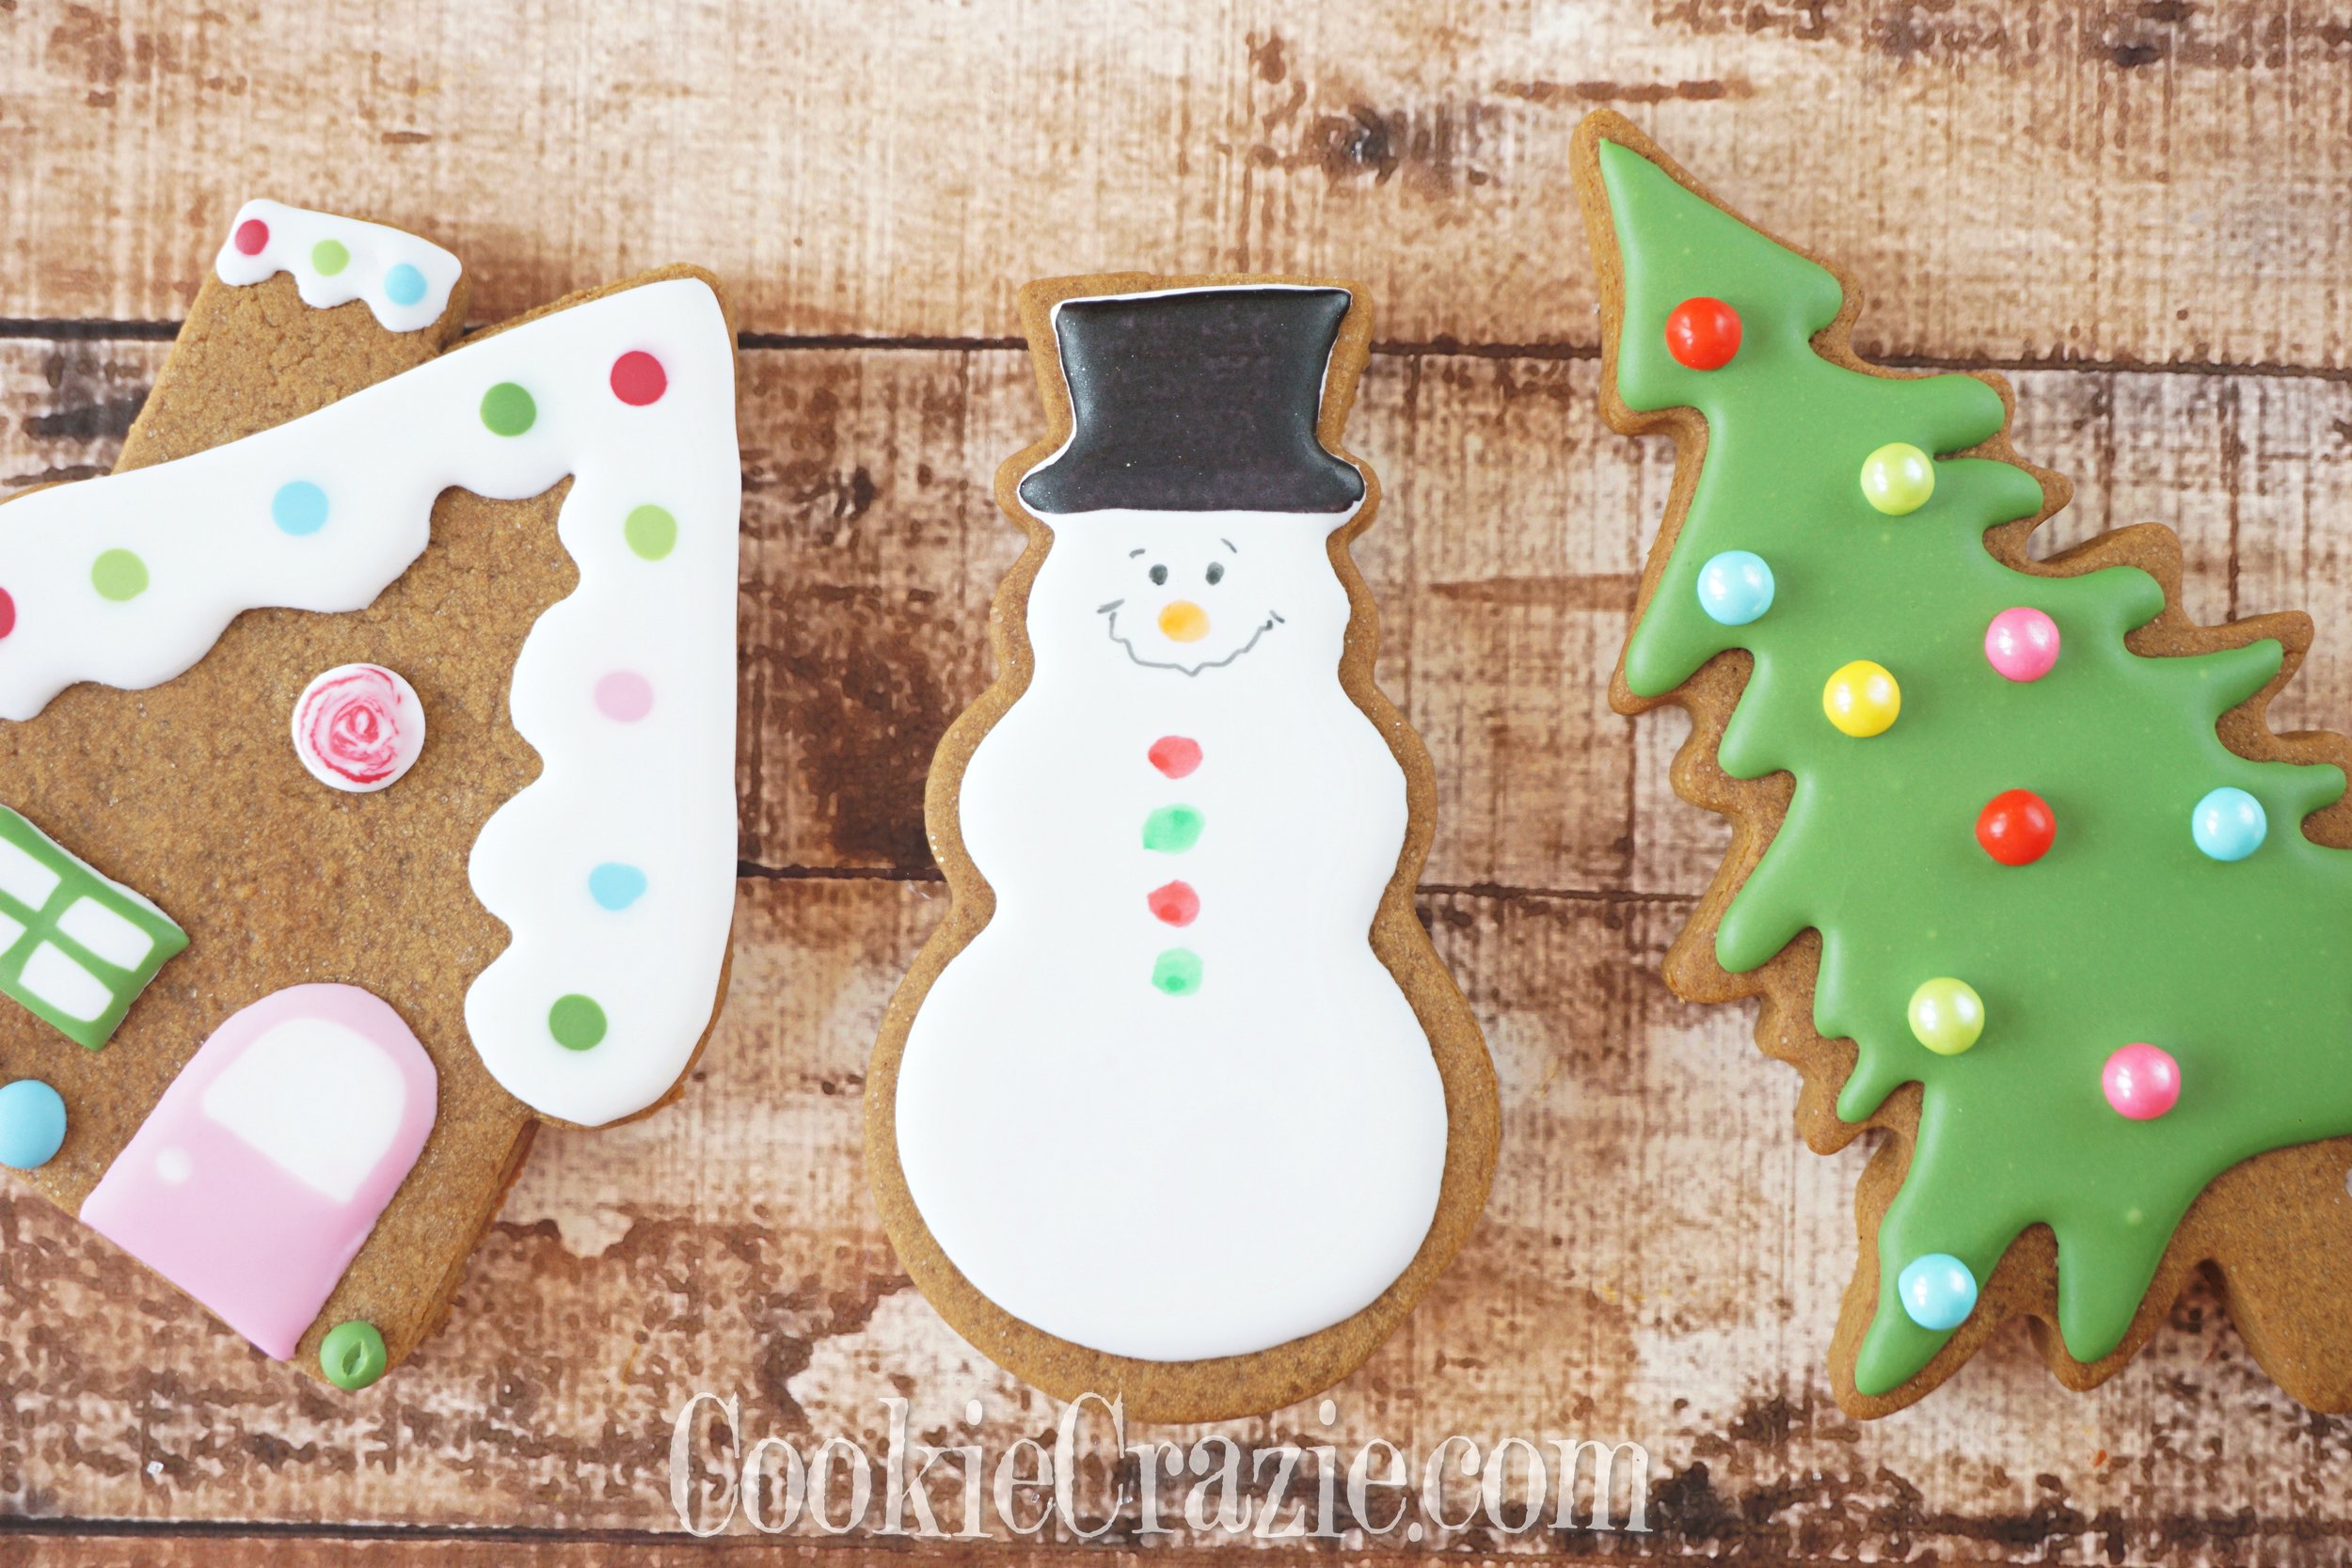  Snowman Decorated Sugar Cookie YouTube video  HERE  